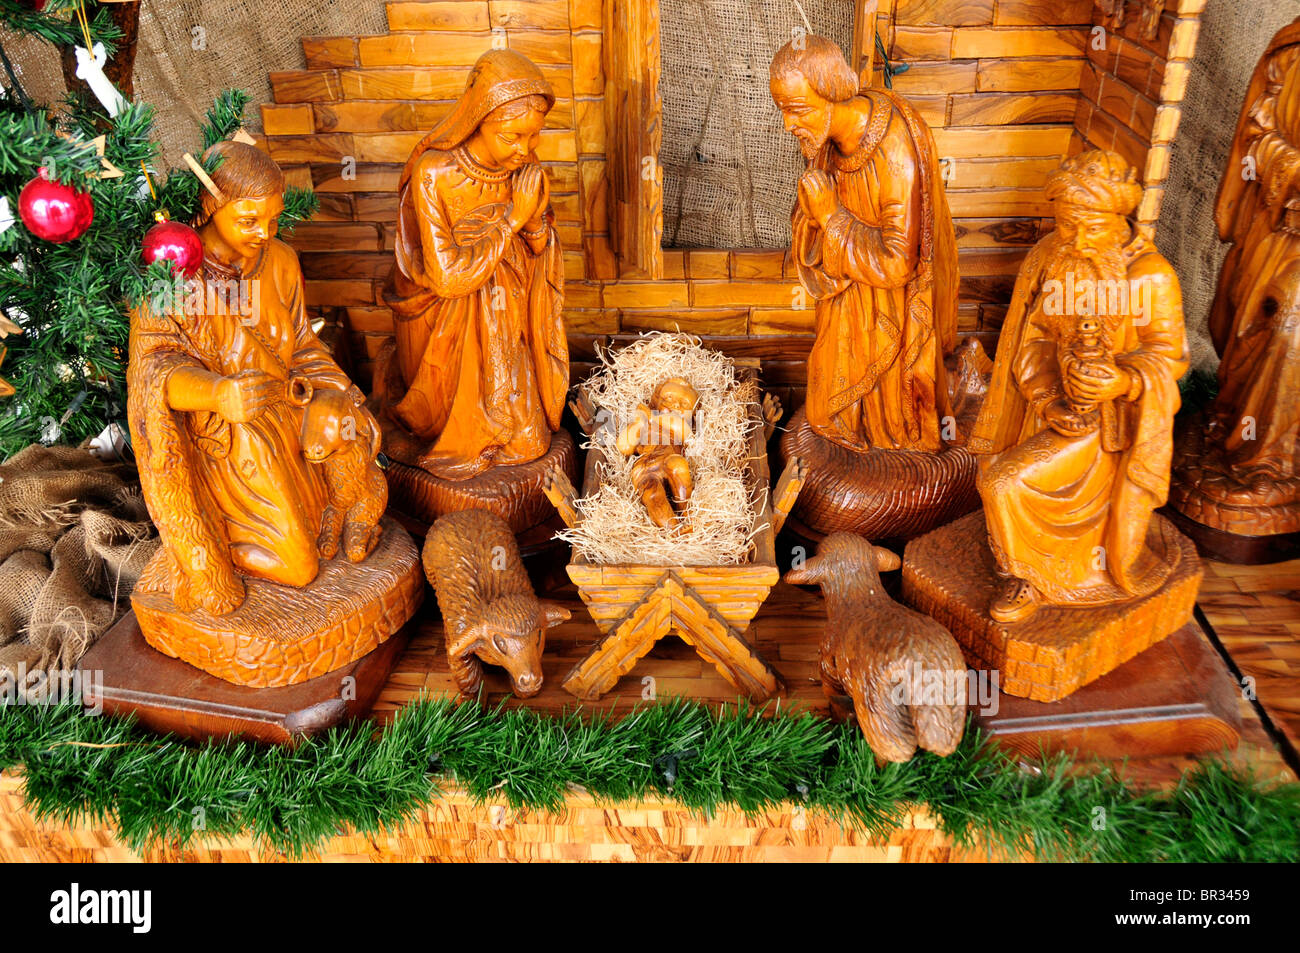 Nativity scene in a souvenir shop close to the the Chapel of the Nativity of Christ, Bethlehem, West Bank, Israel, Middle East Stock Photo